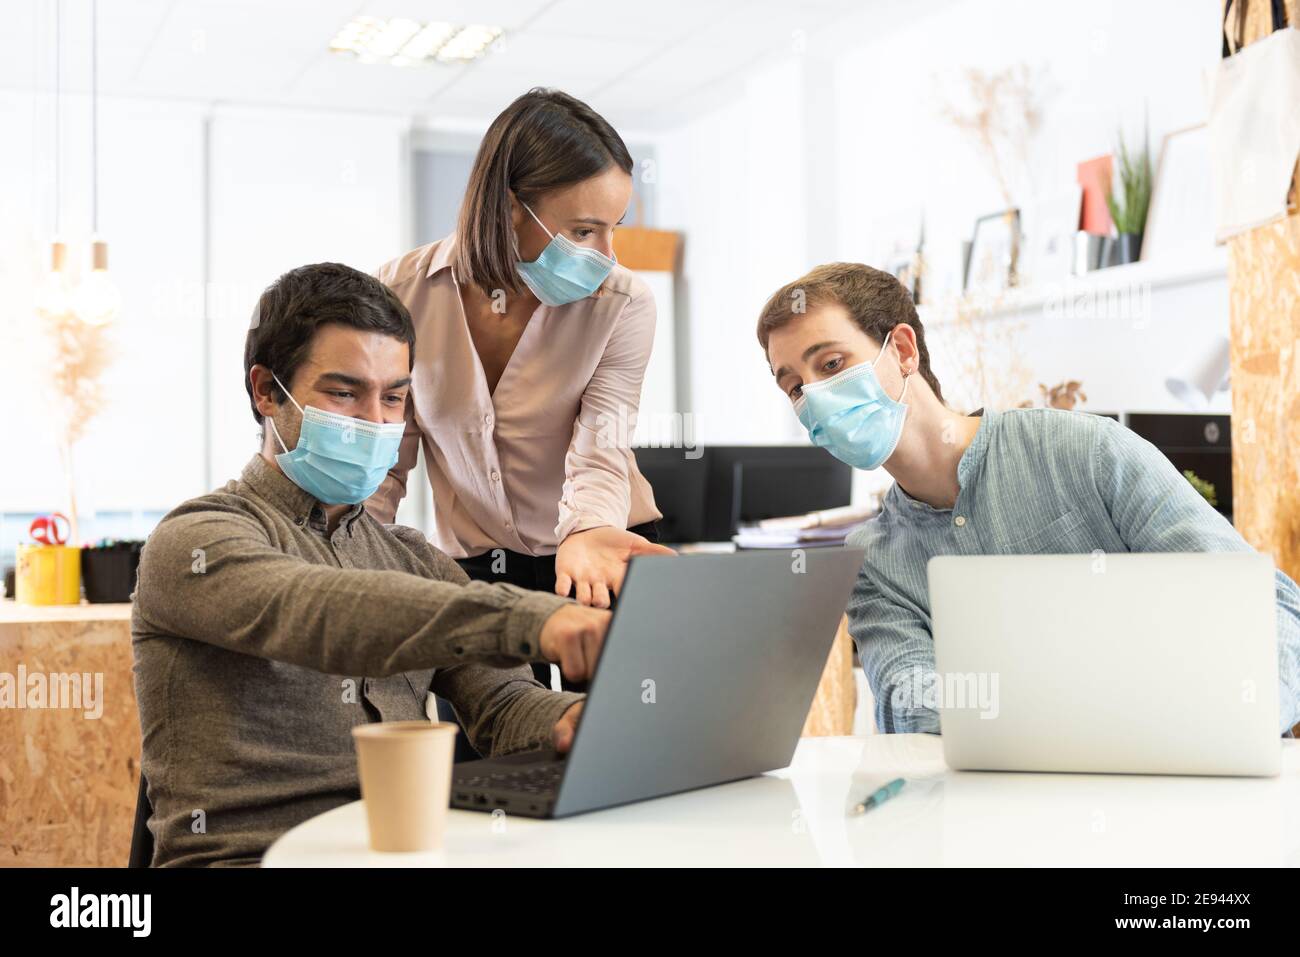 Three coworkers discussing and looking at a laptop while wearing face masks. Working in the office during Coronavirus pandemic concept. Stock Photo